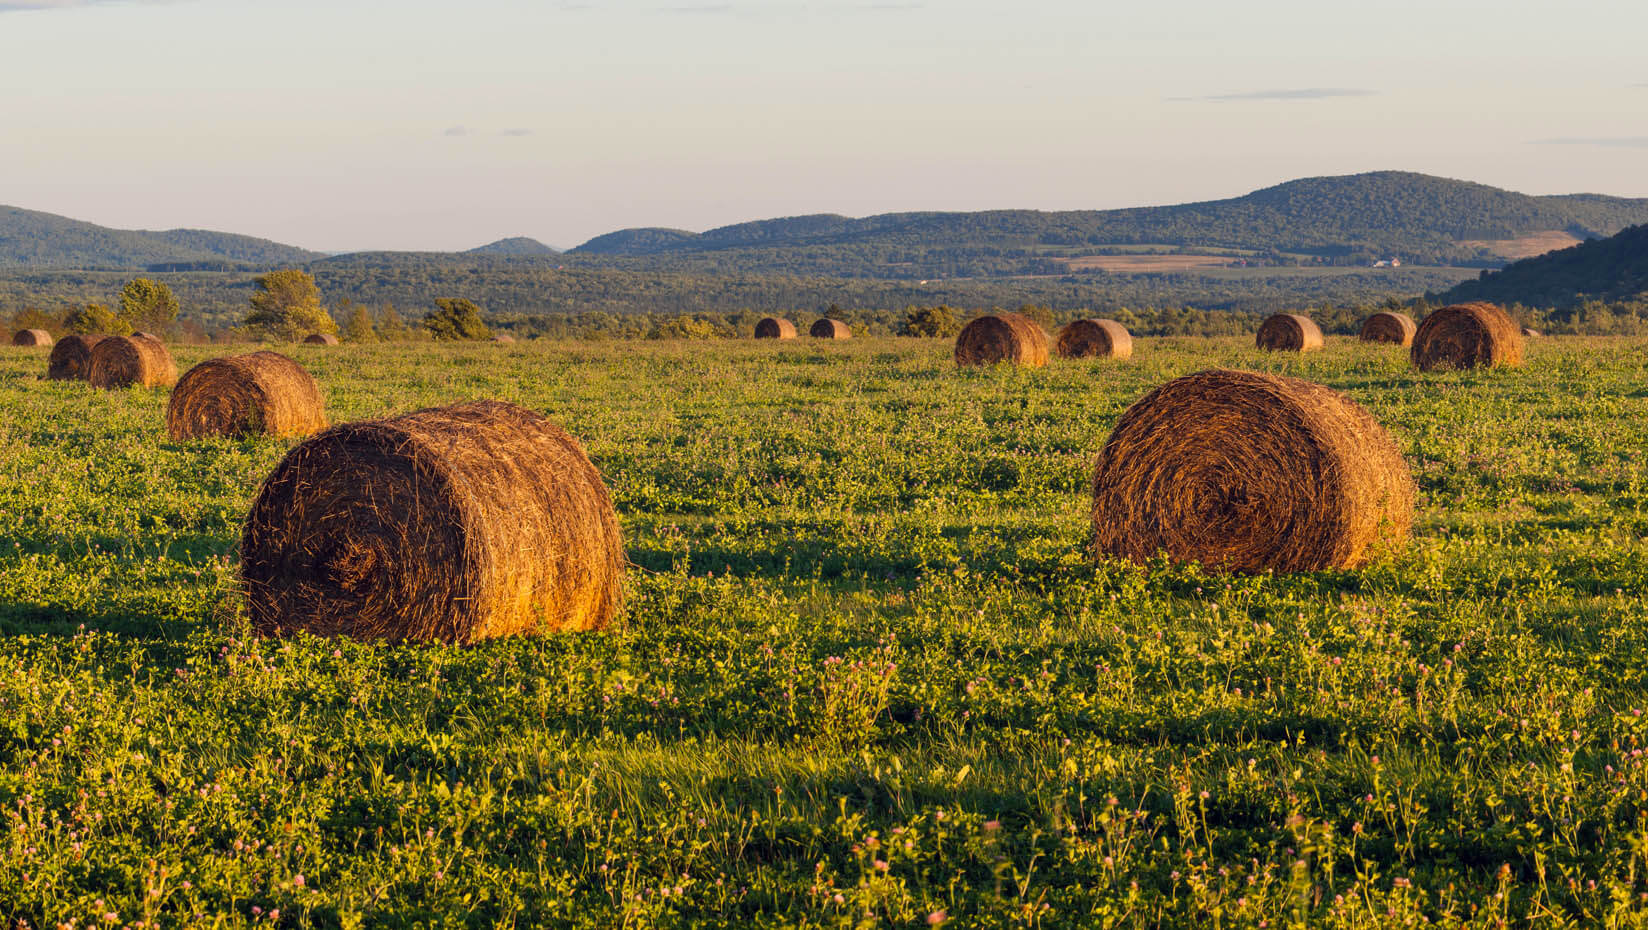 Hay bales in a field in Maine